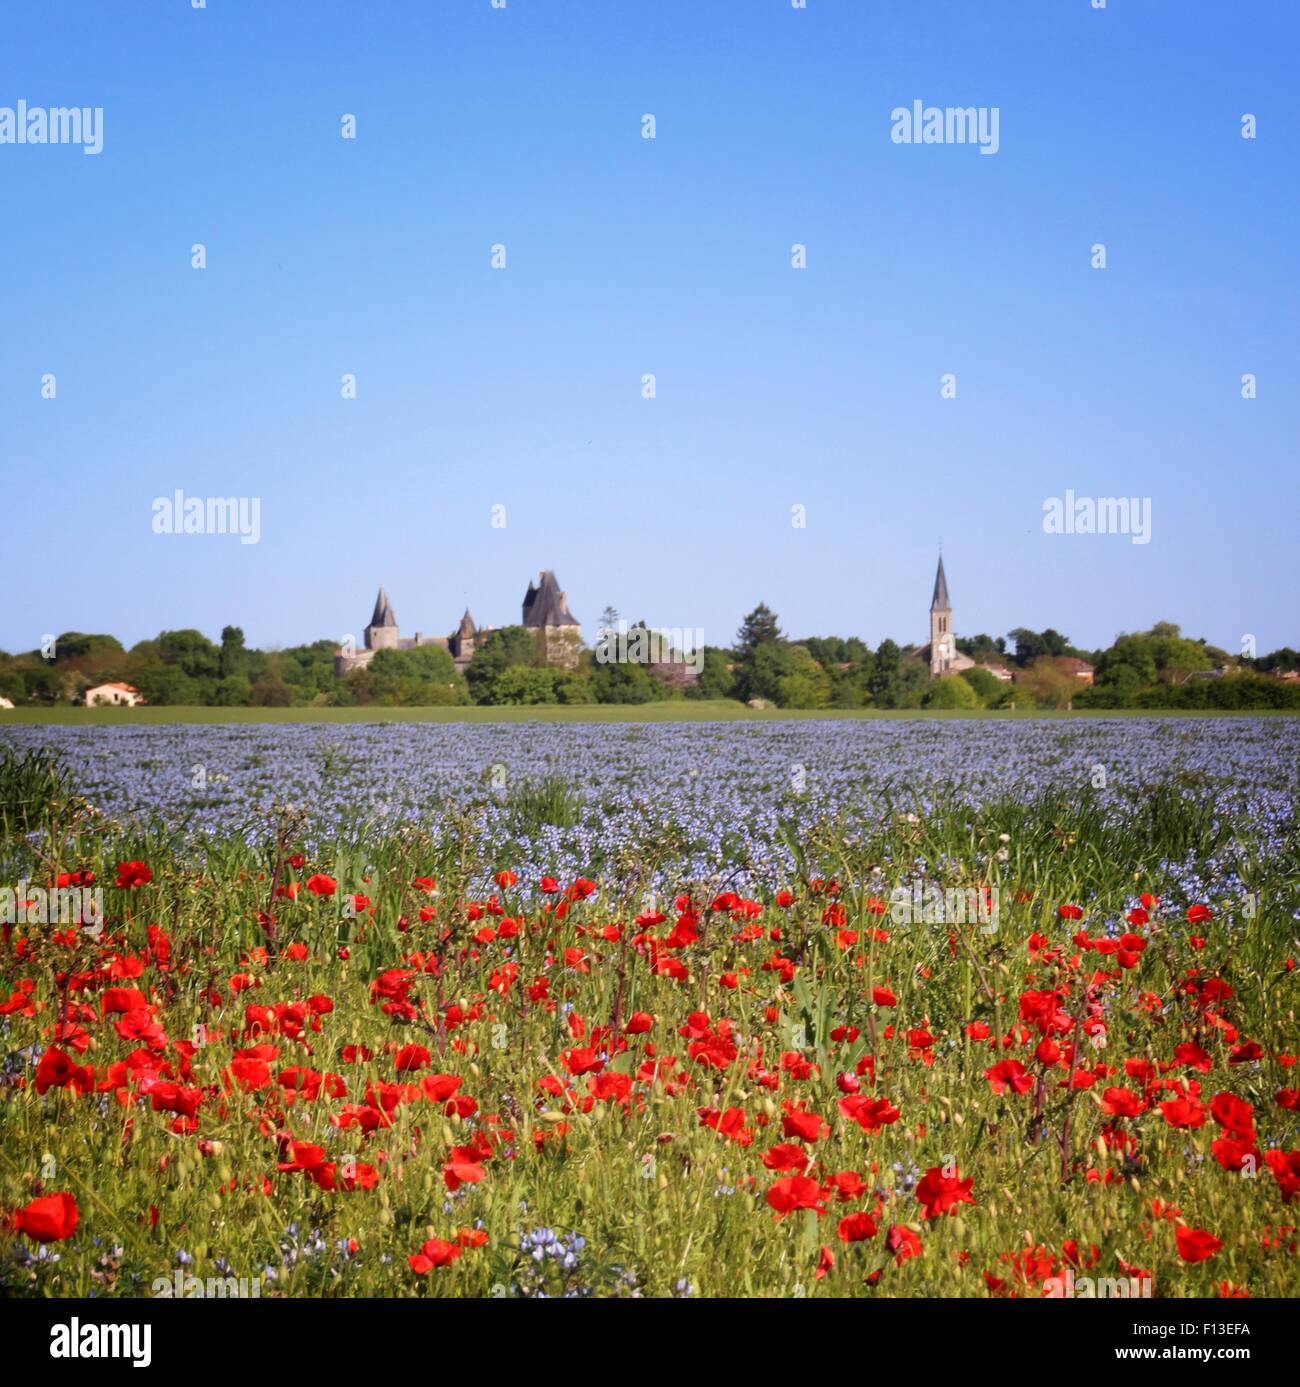 Field of poppies and blue wildflowers, Niort, Poitou-Charentes, France Stock Photo